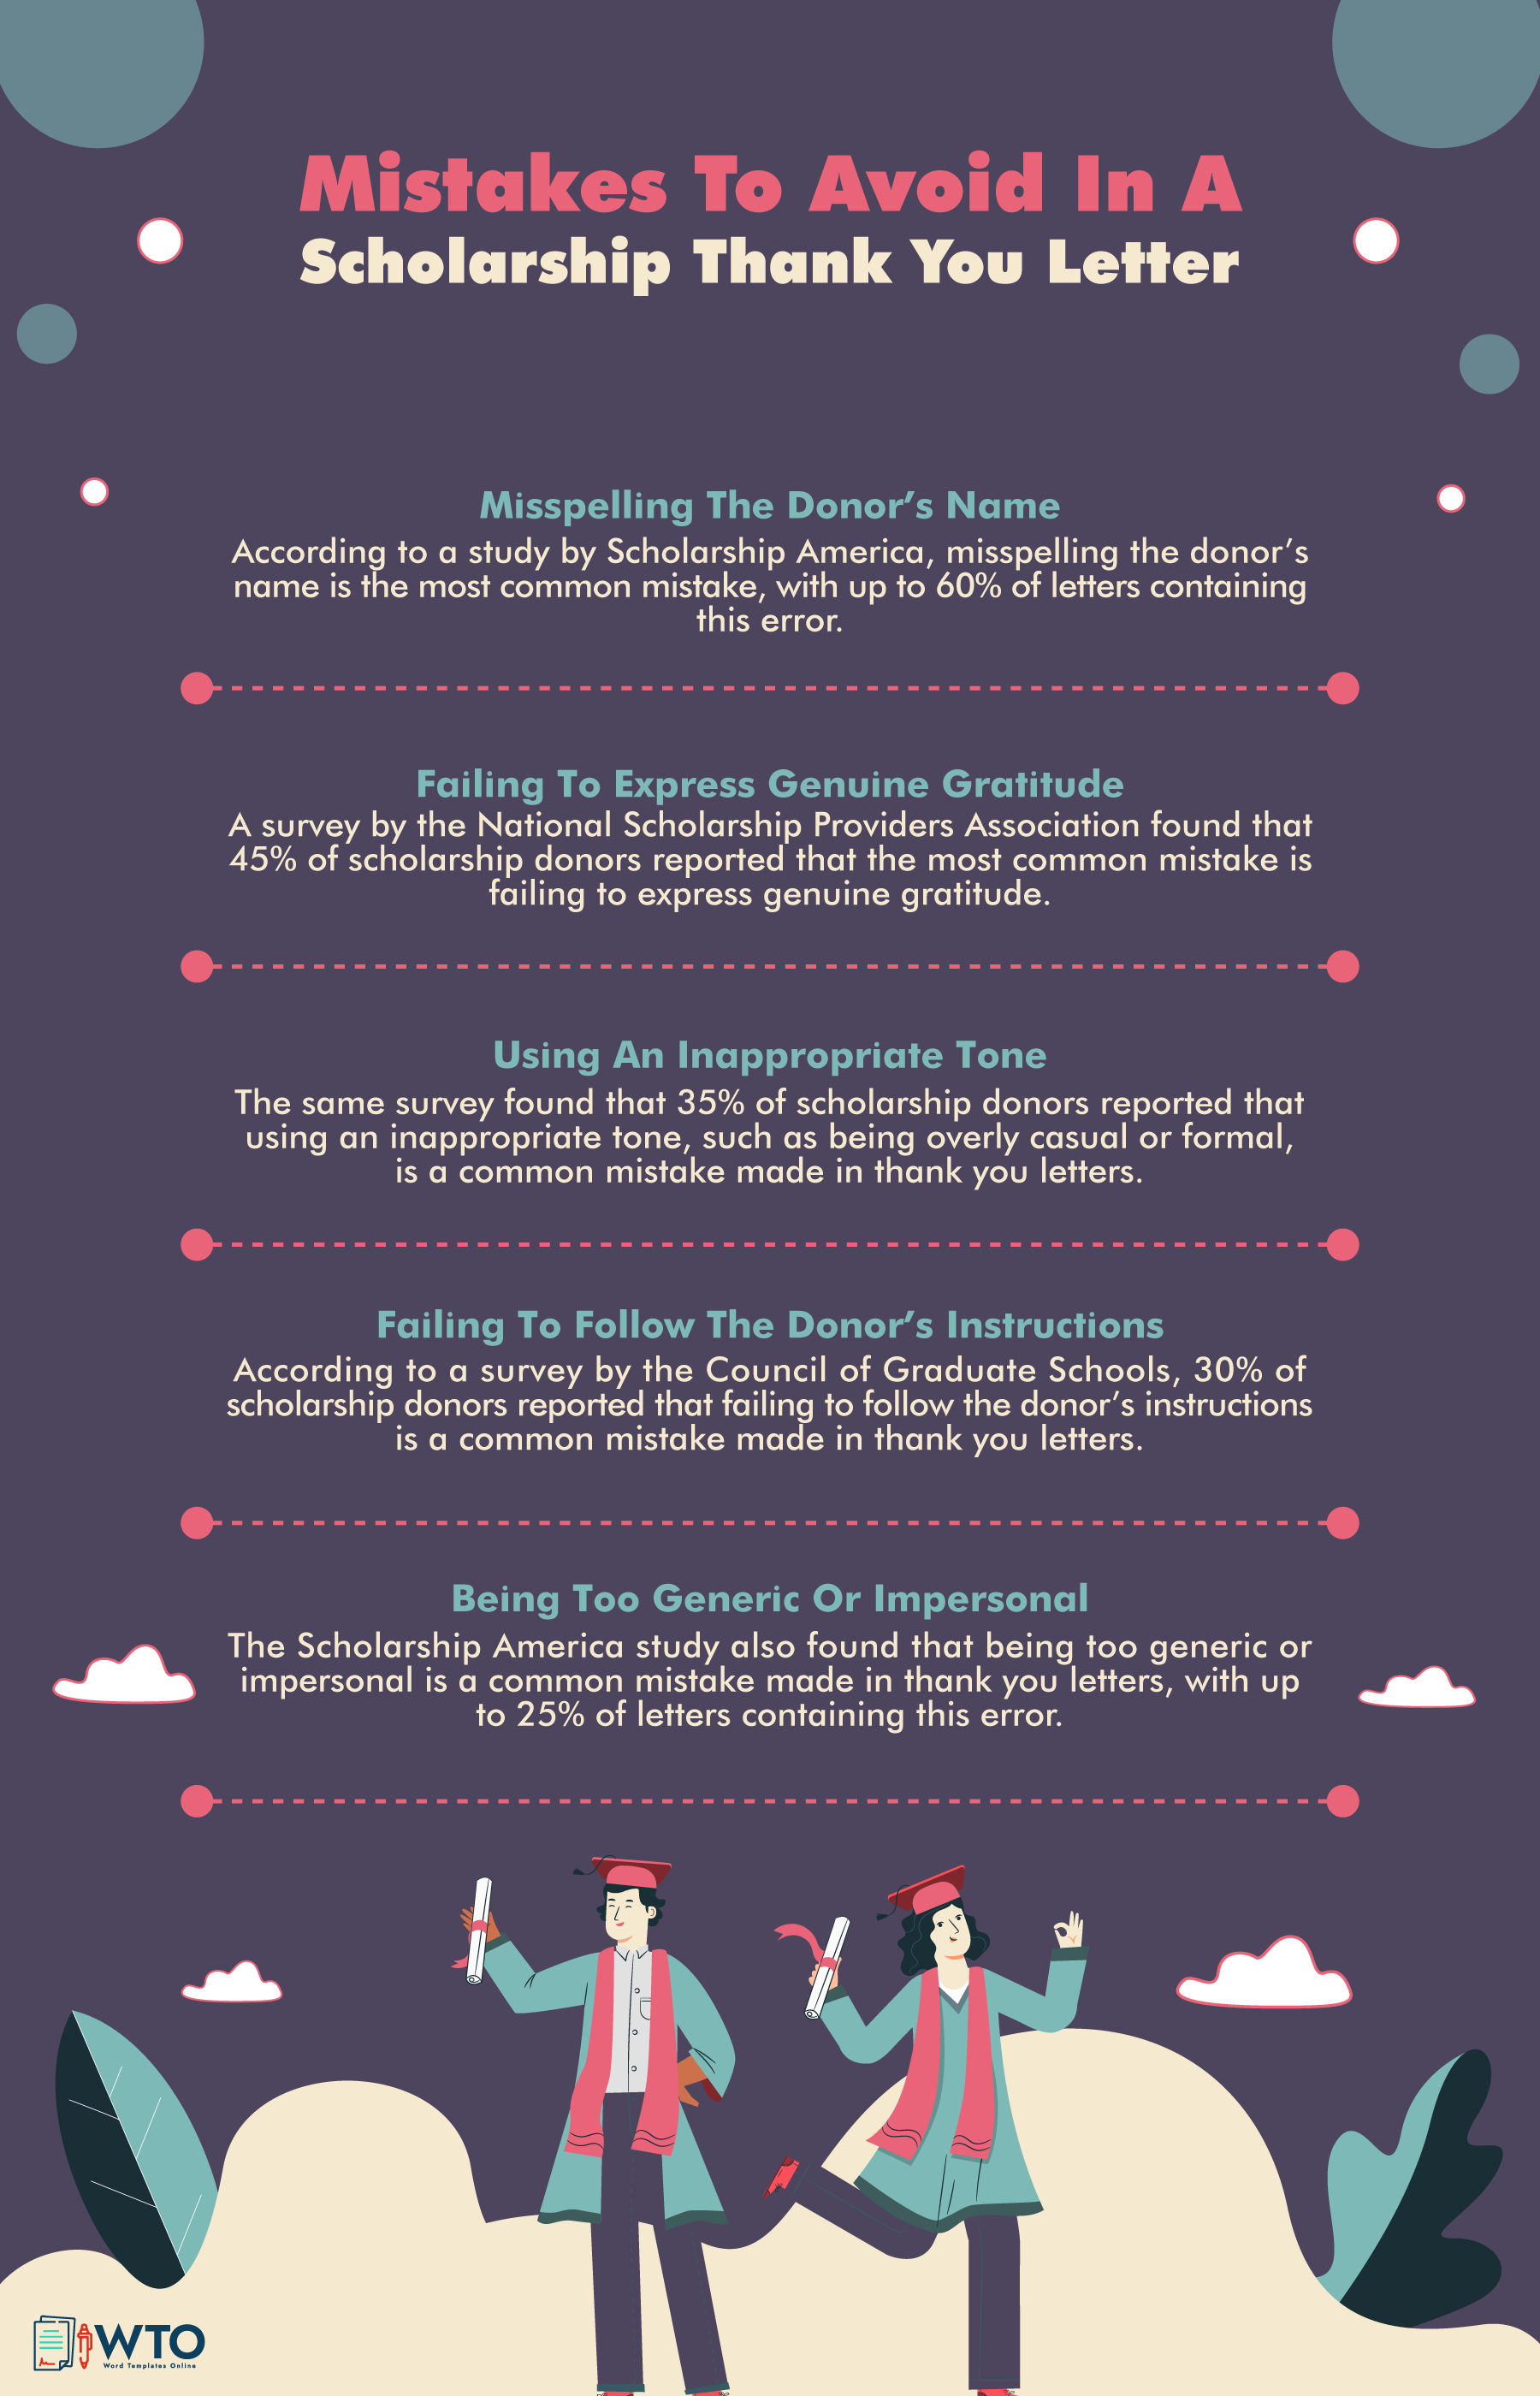 This infographic is about mistakes to avoid in scholarship thank you letter.